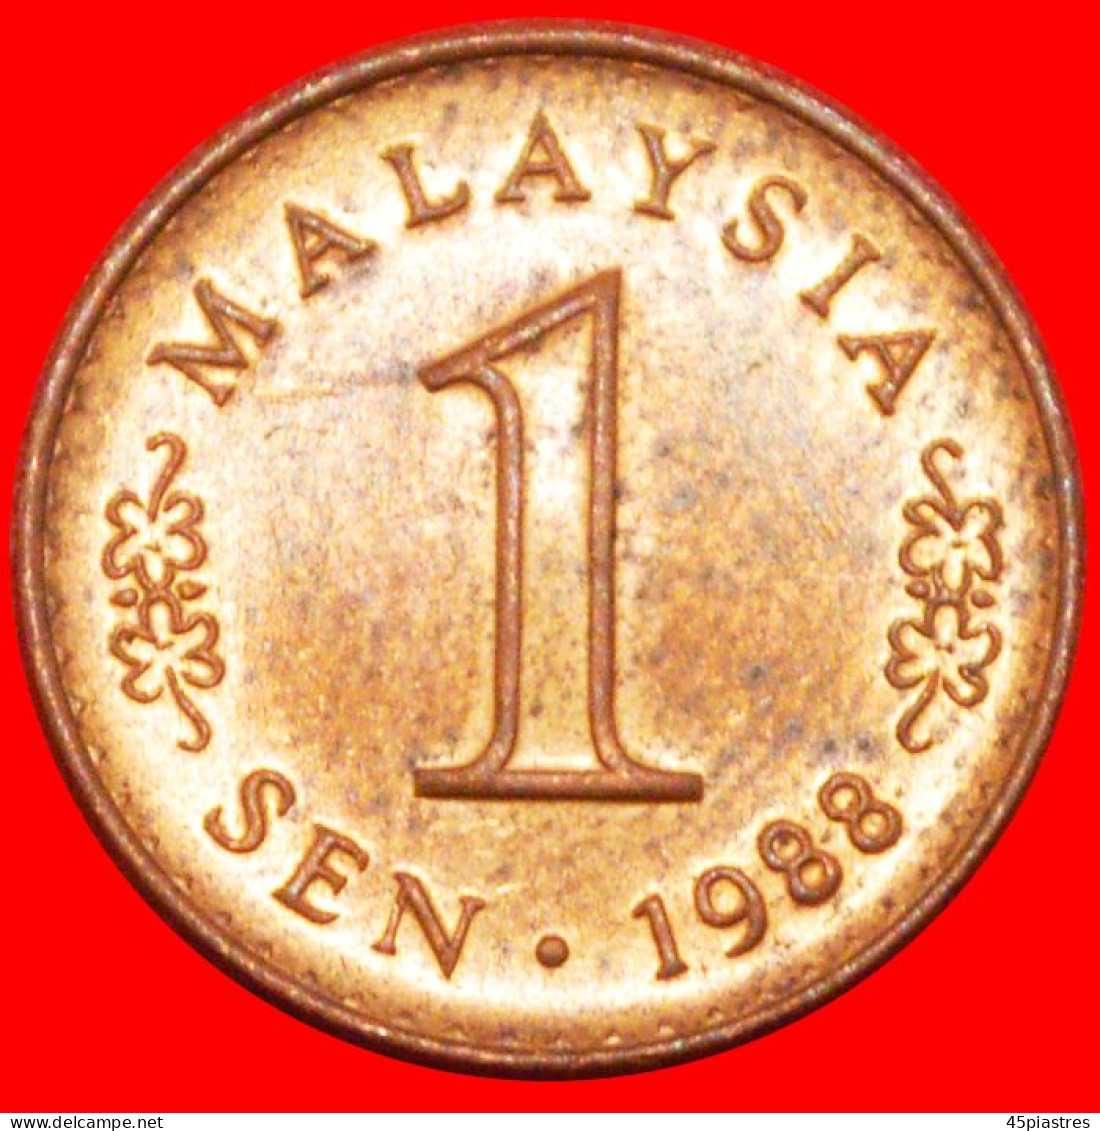 * MOON AND STAR ERROR (1967-1988): MALAYSIA  1 SEN 1988 UNC MINT LUSTRE! · LOW START ·  NO RESERVE! - Malaysie